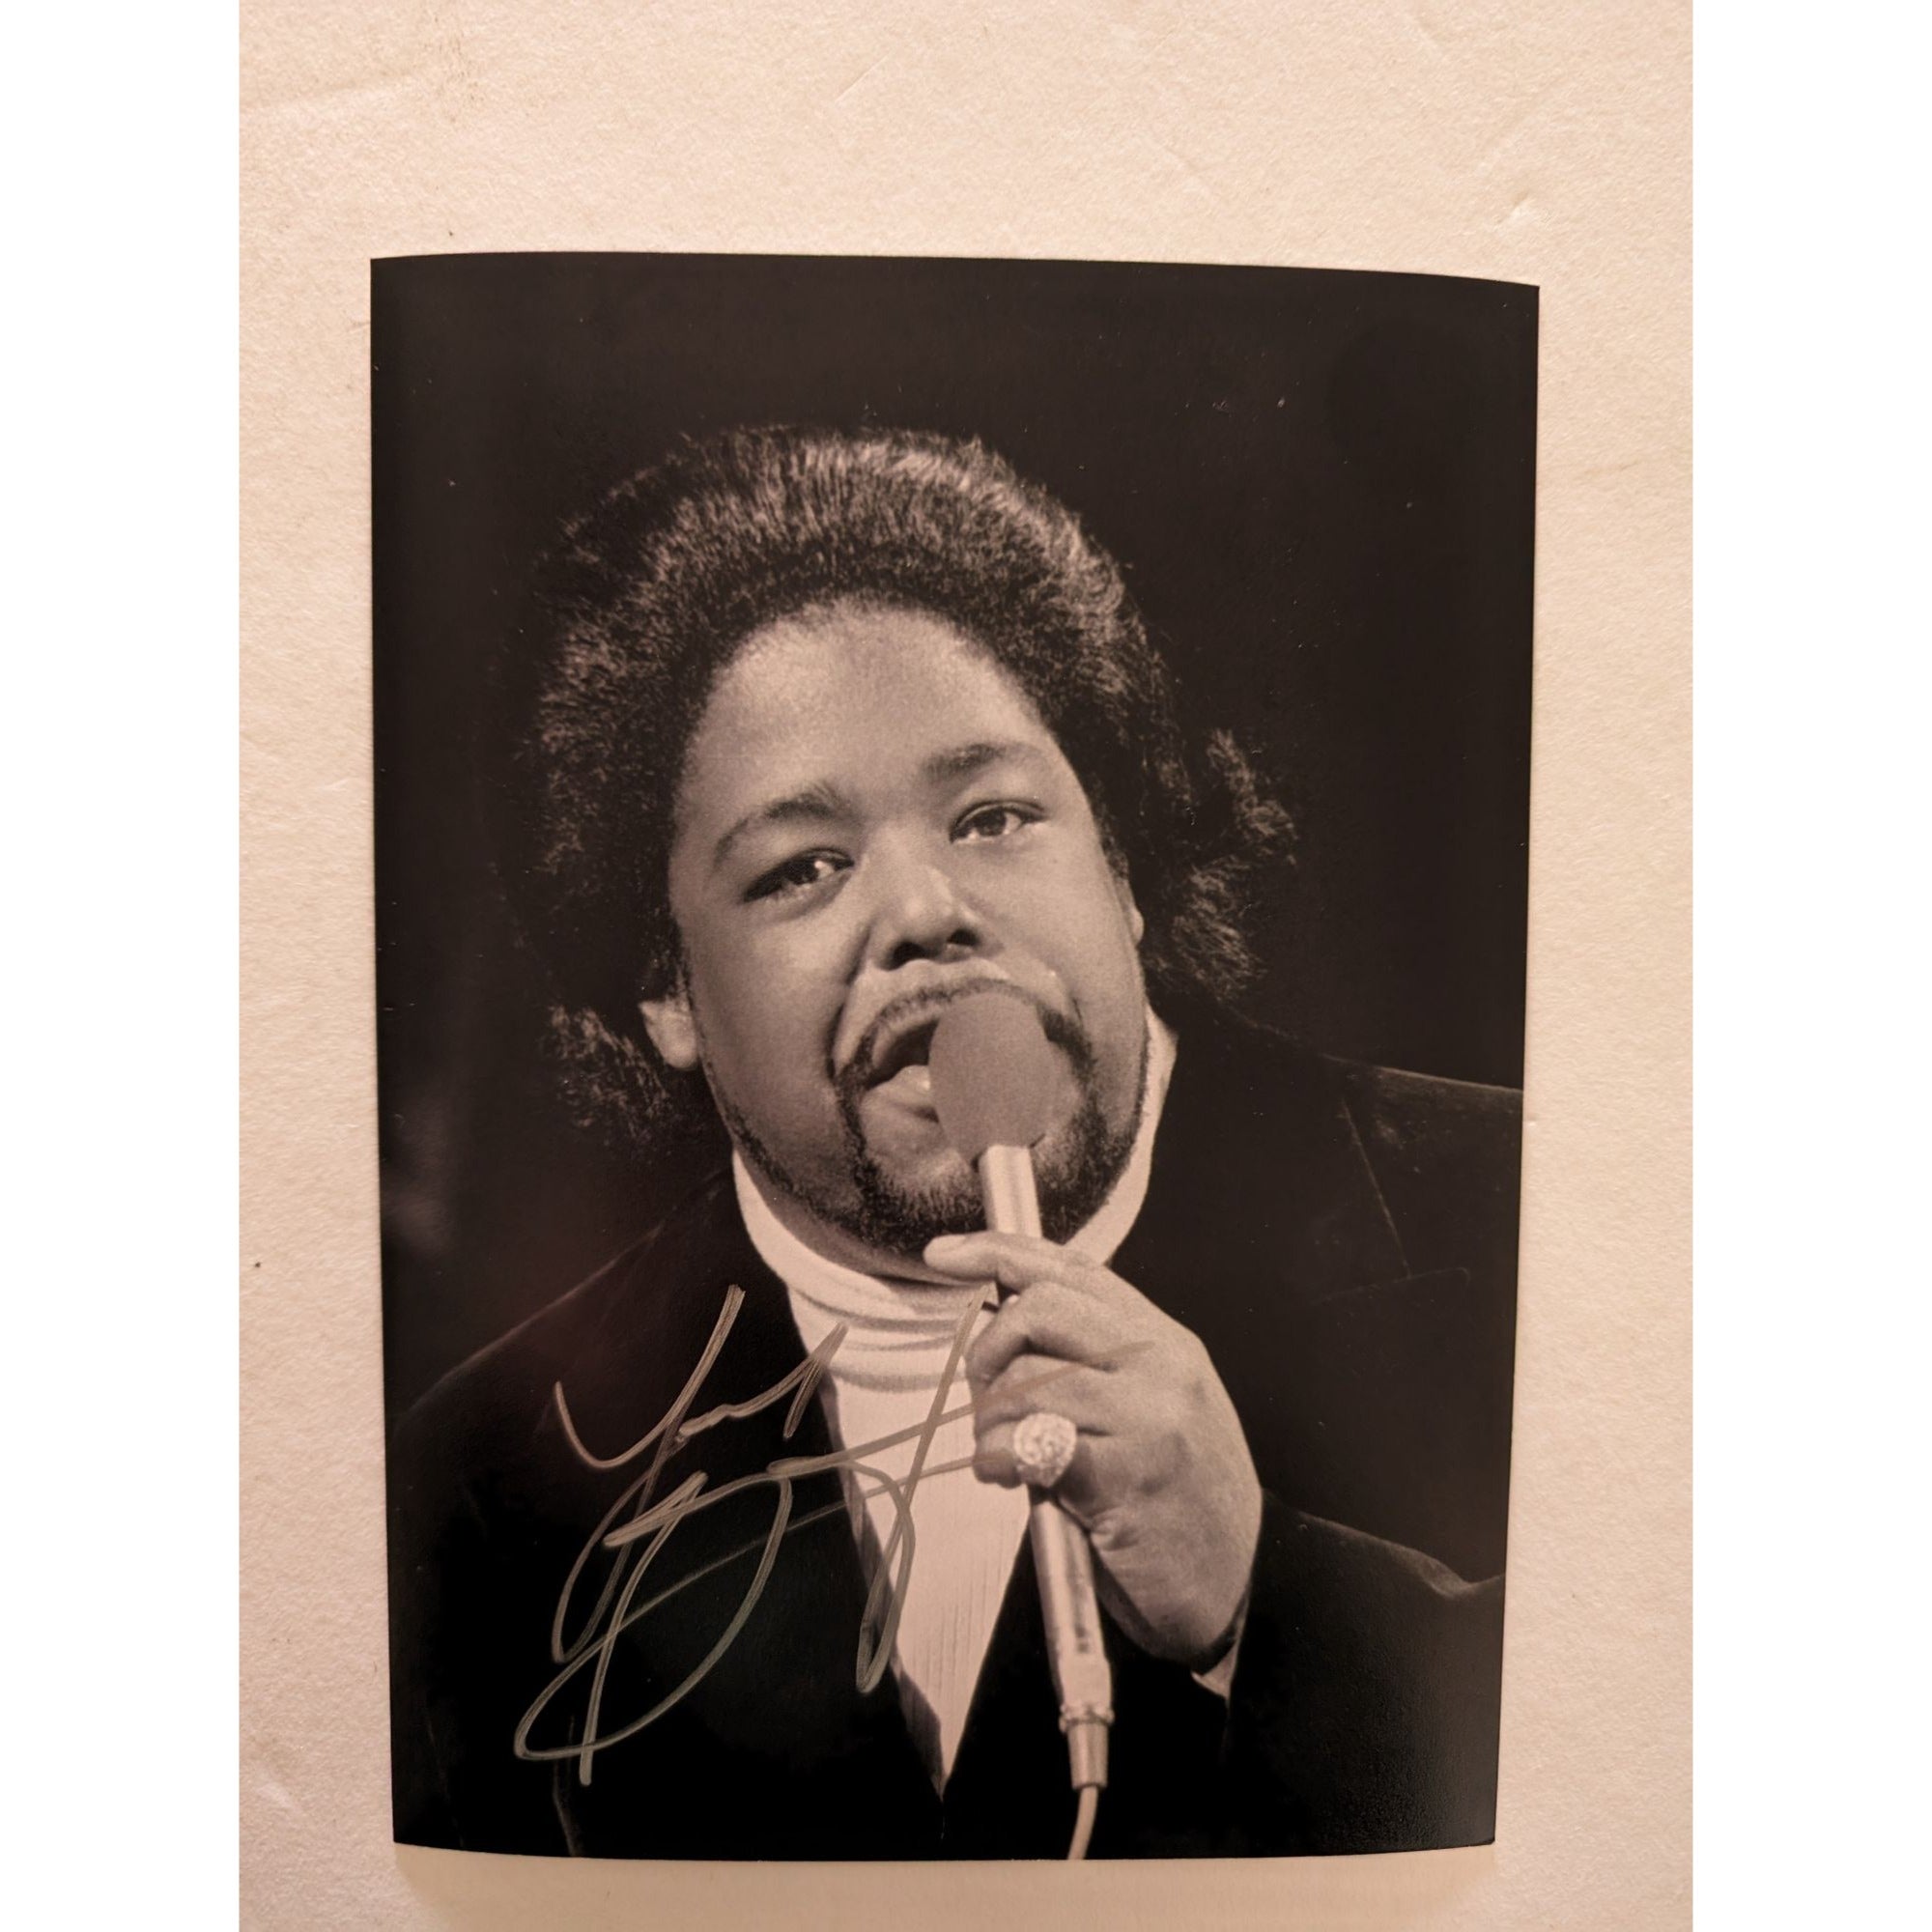 Barry White 5x7 photo signed with proof